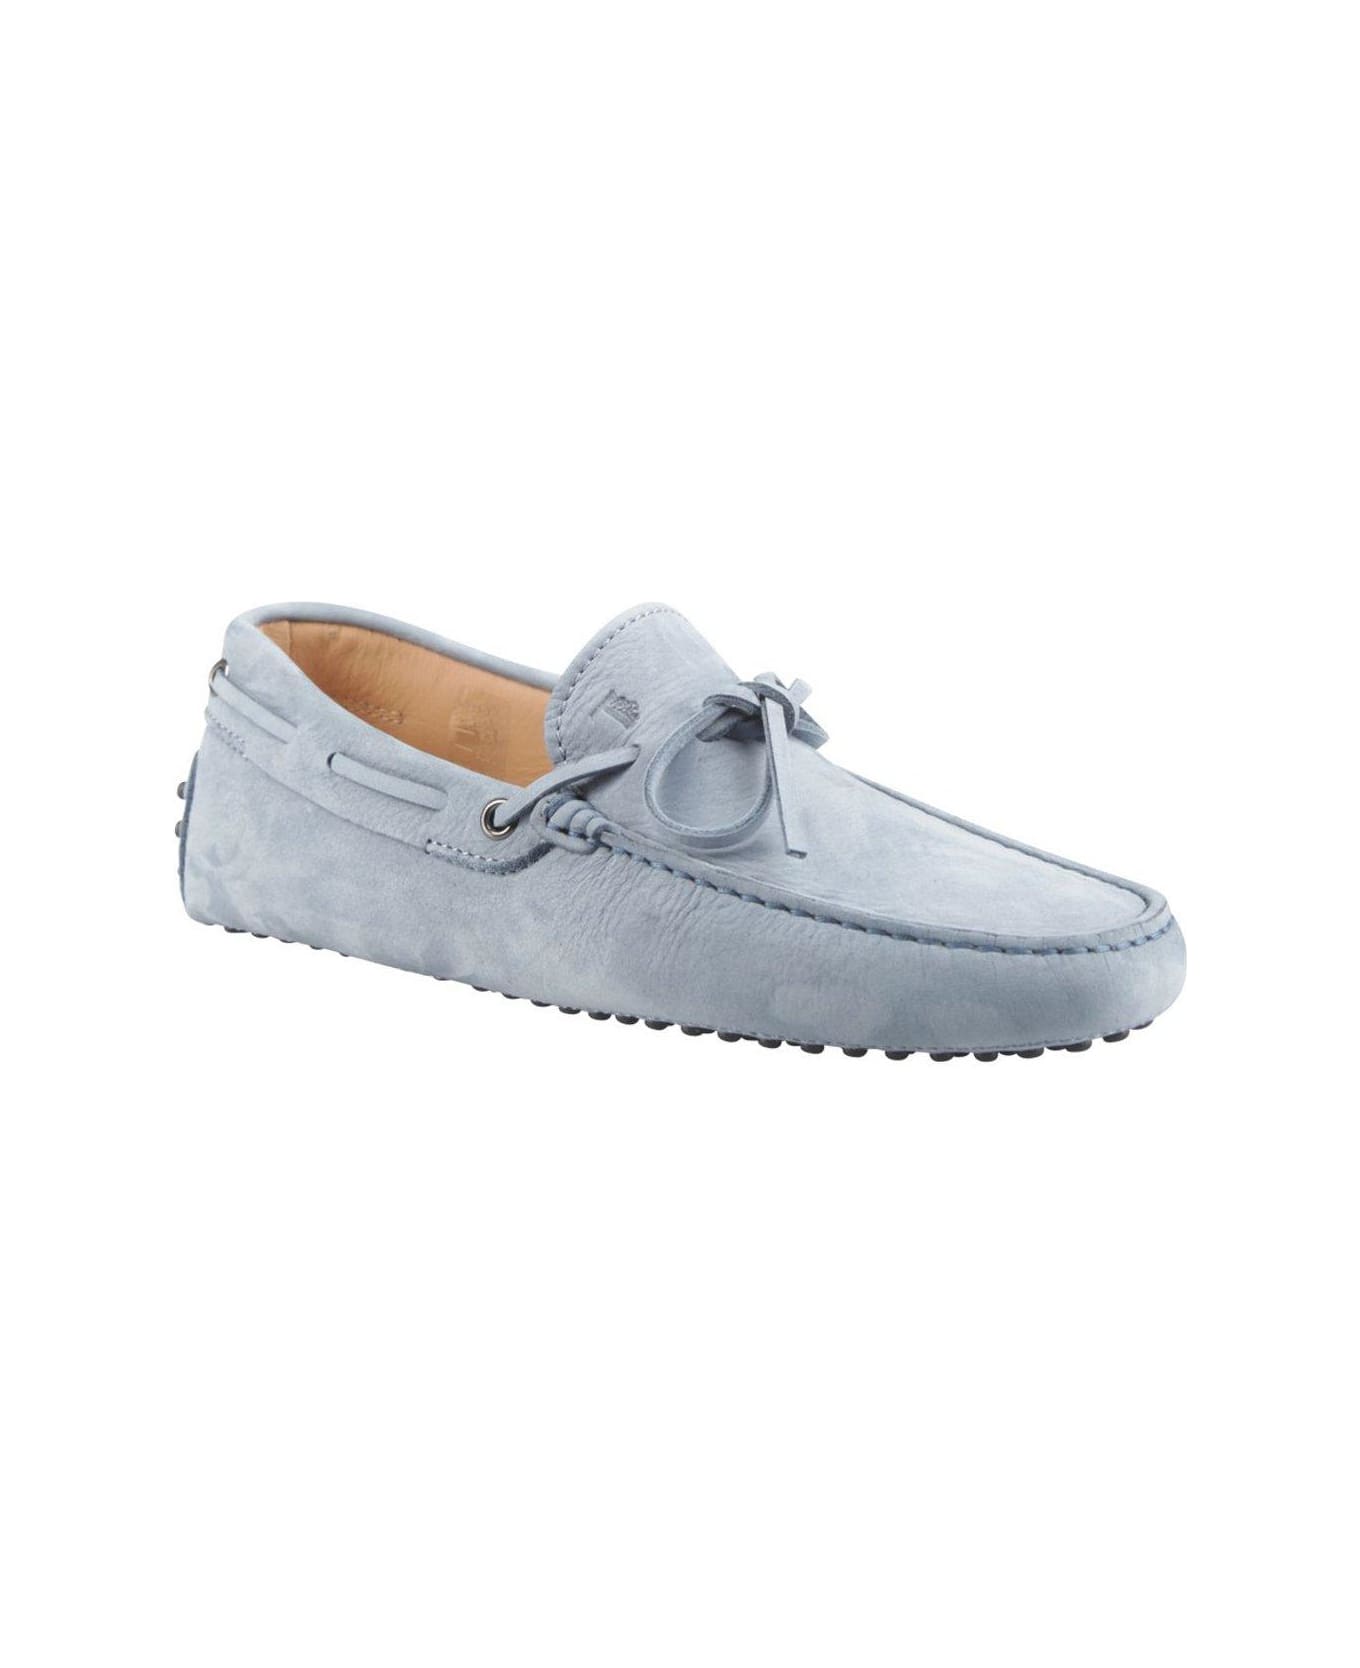 Tod's Round Toe Slip-on Loafers - Azzurro